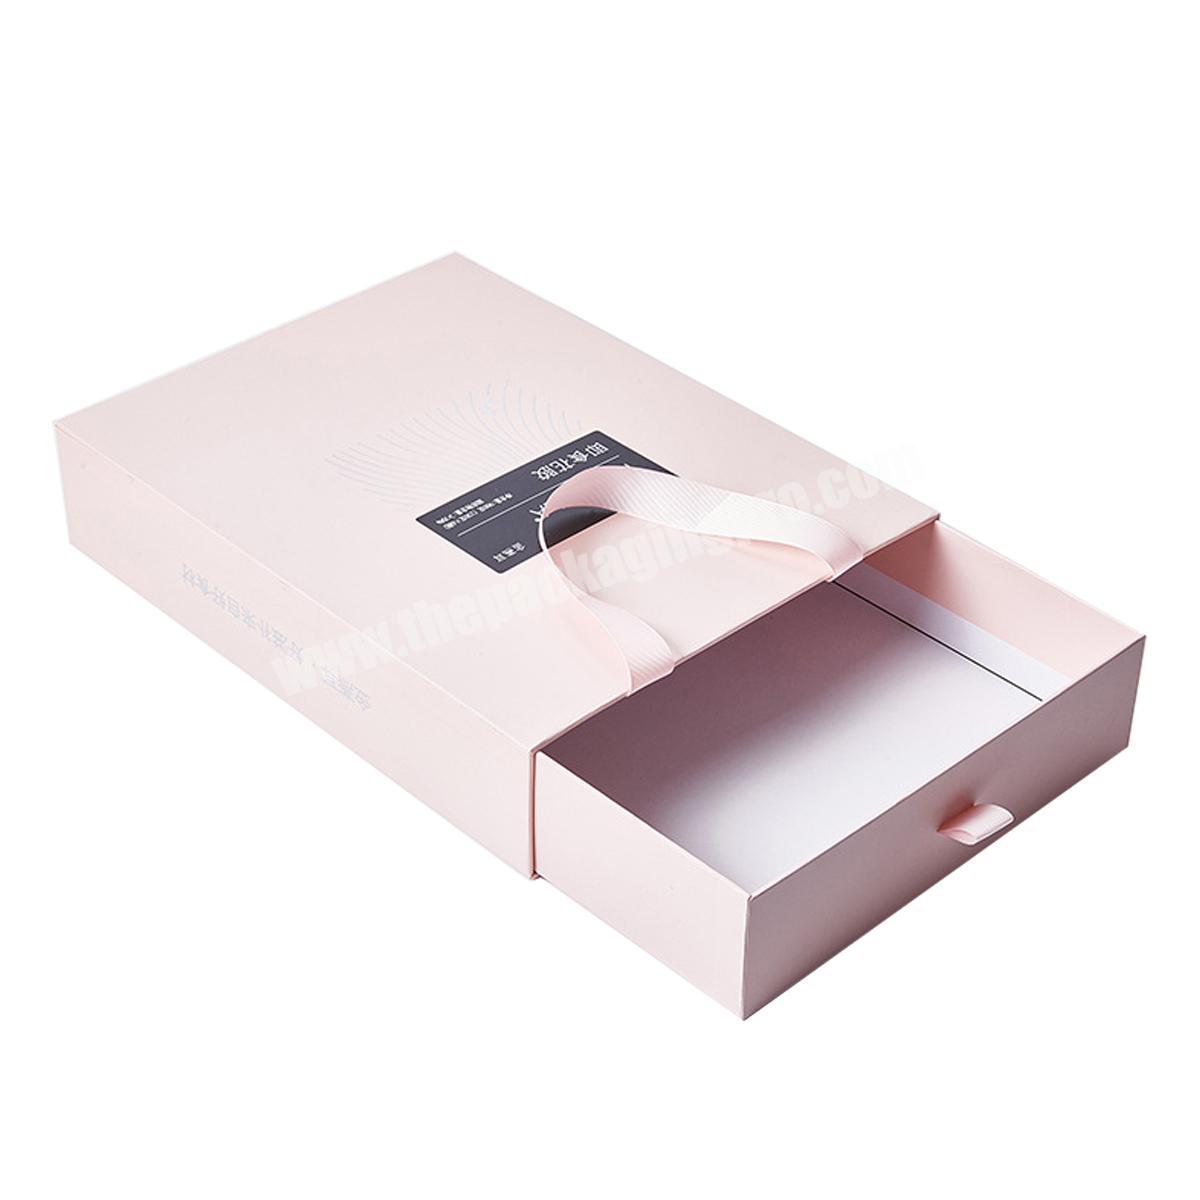 whisky bottle vitamin floral packaging boxes with wrapping paper packaging ever box for clothes